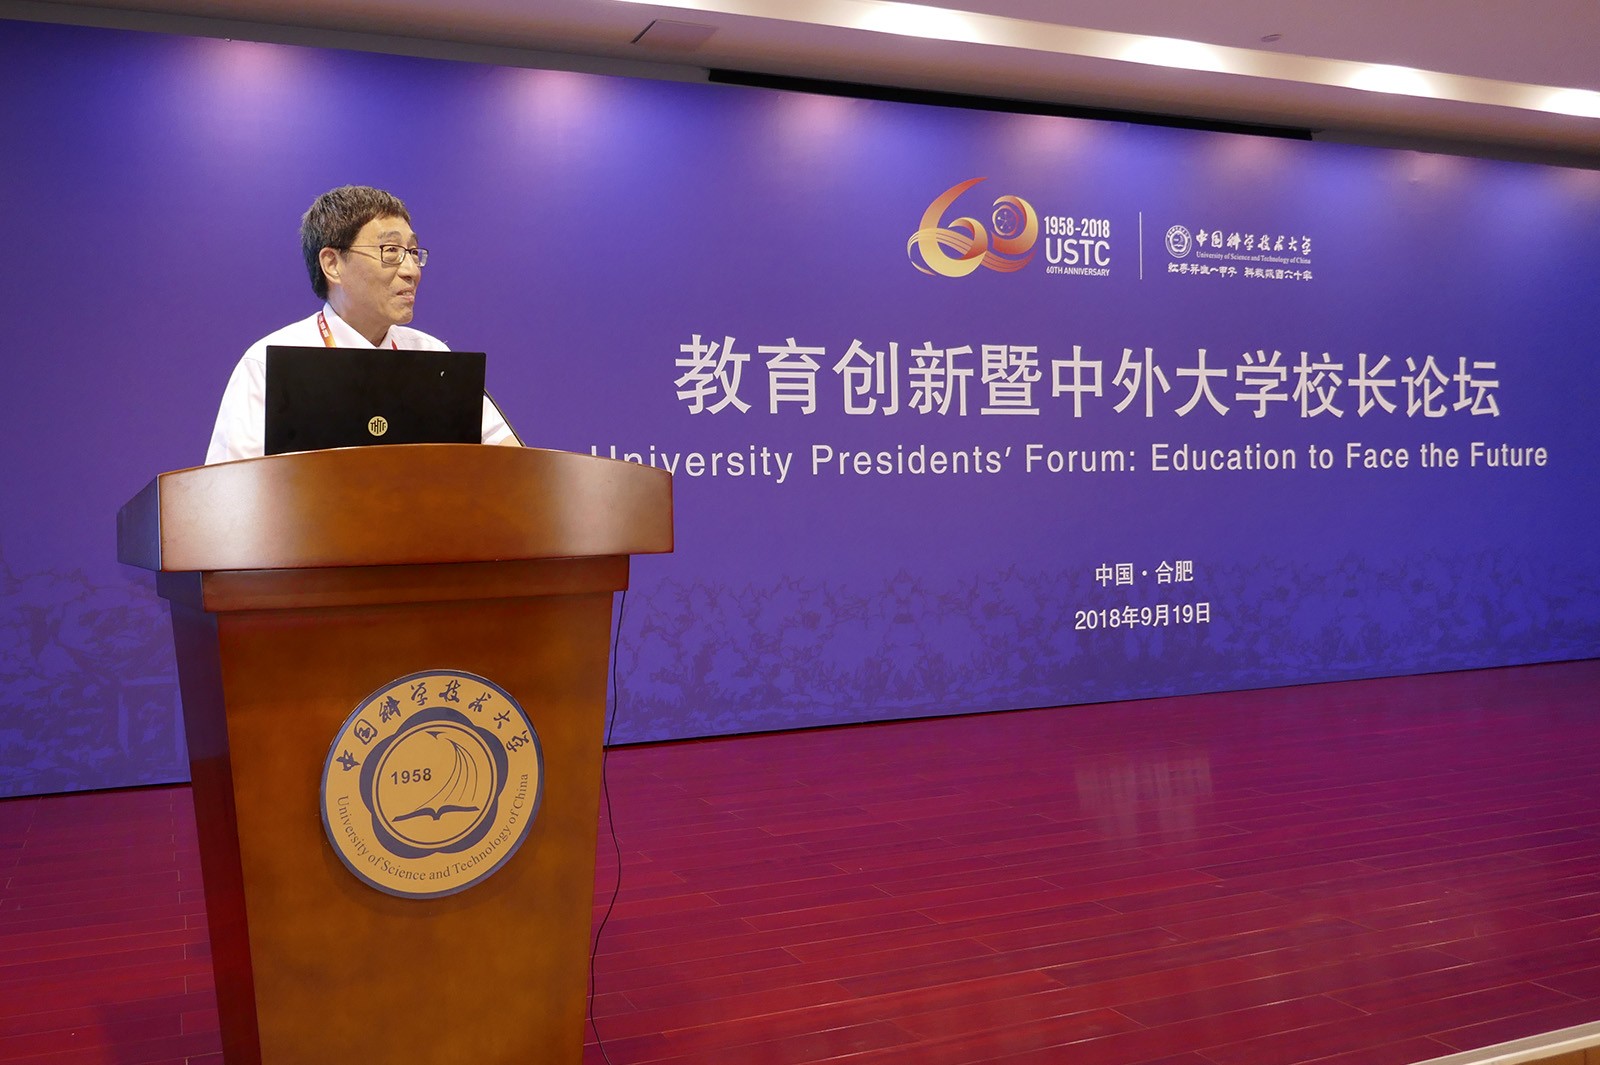 Professor Kuo delivers a talk at the University Presidents’ Forum: Education to Face the Future.       